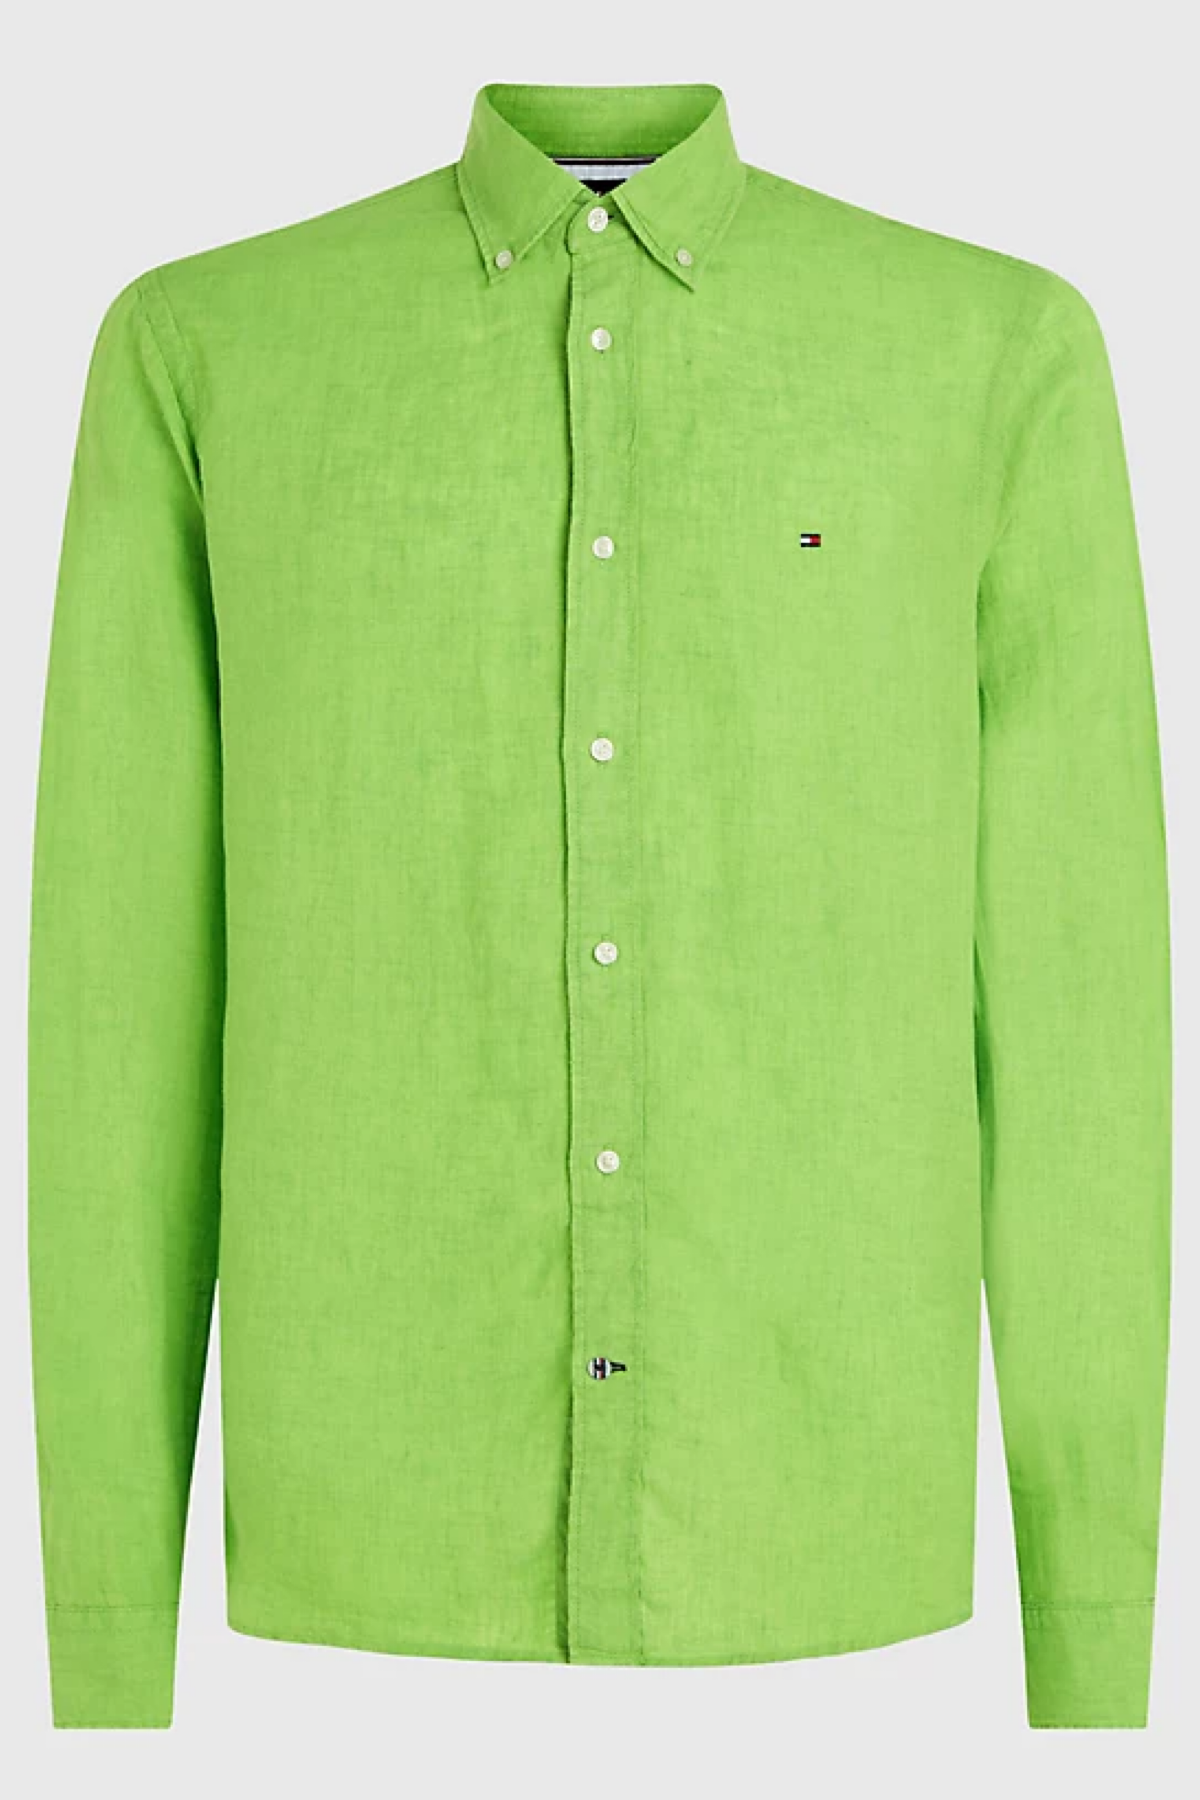 Tommy Hilfiger camicia spring lime 30897